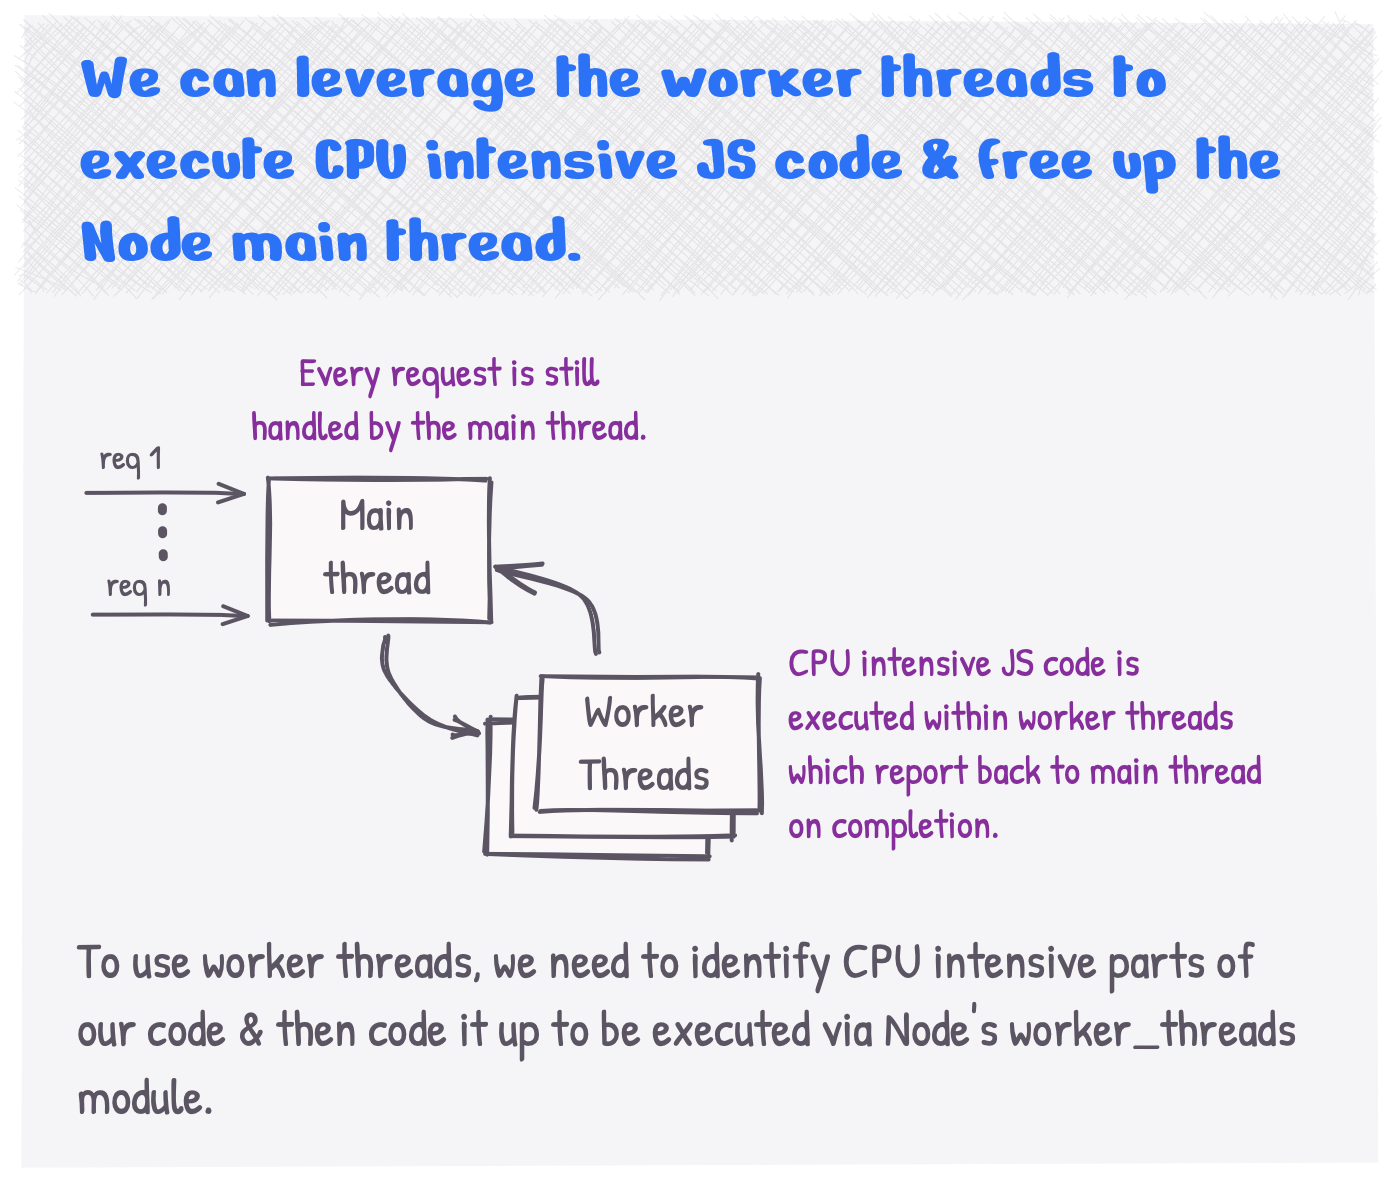 We can leverage worker threads to execute CPU intensive tasks to free up the Node main thread